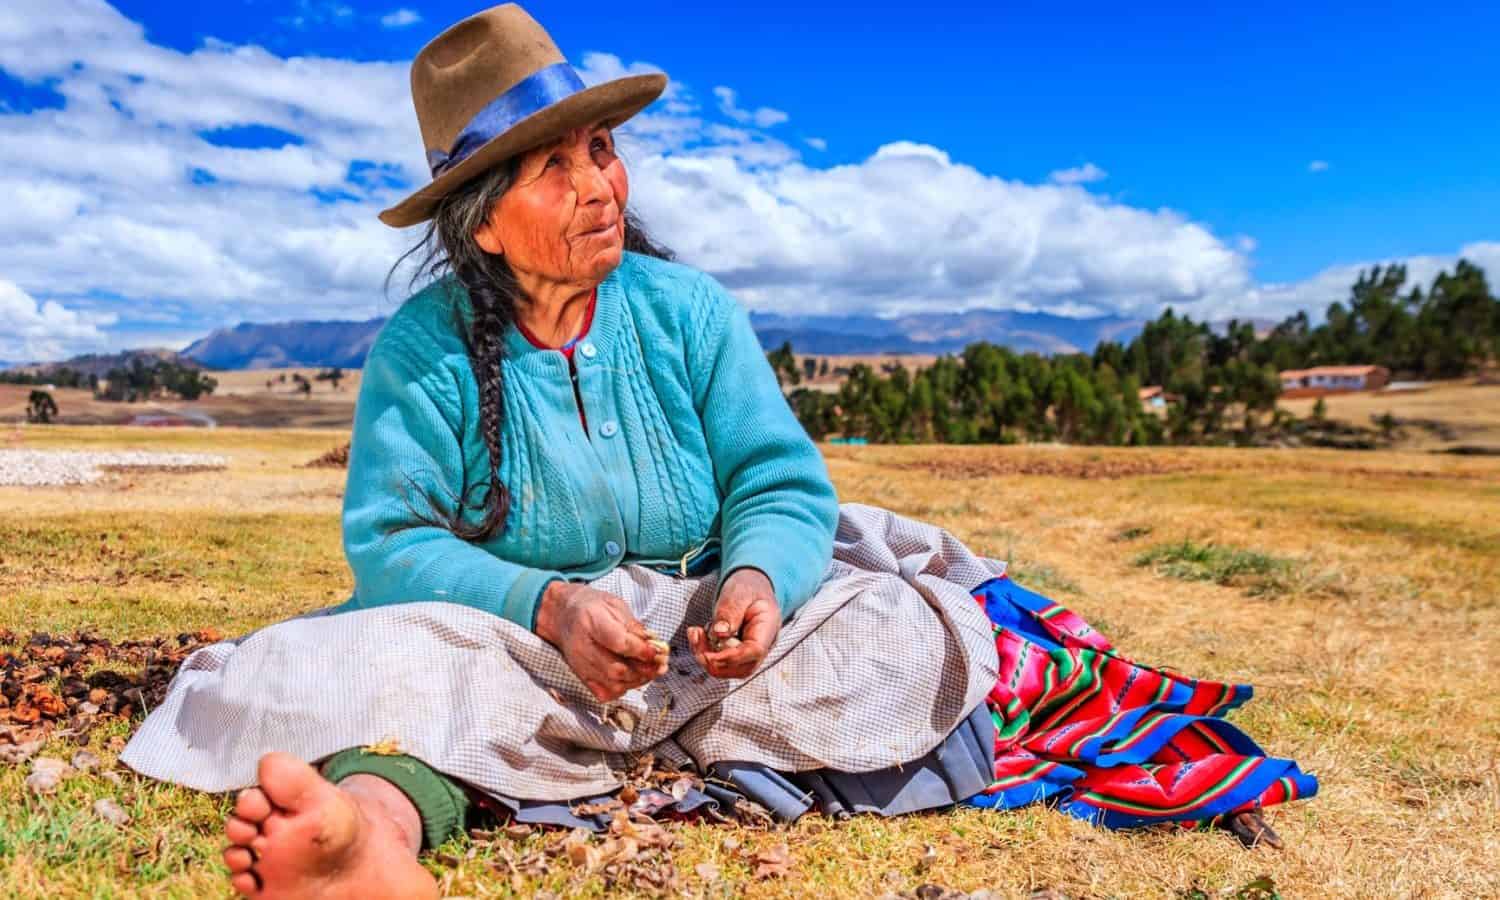 Food Tank is celebrating World Day of Indigenous Peoples by highlighting five indigenous farming practices enhancing global food security.